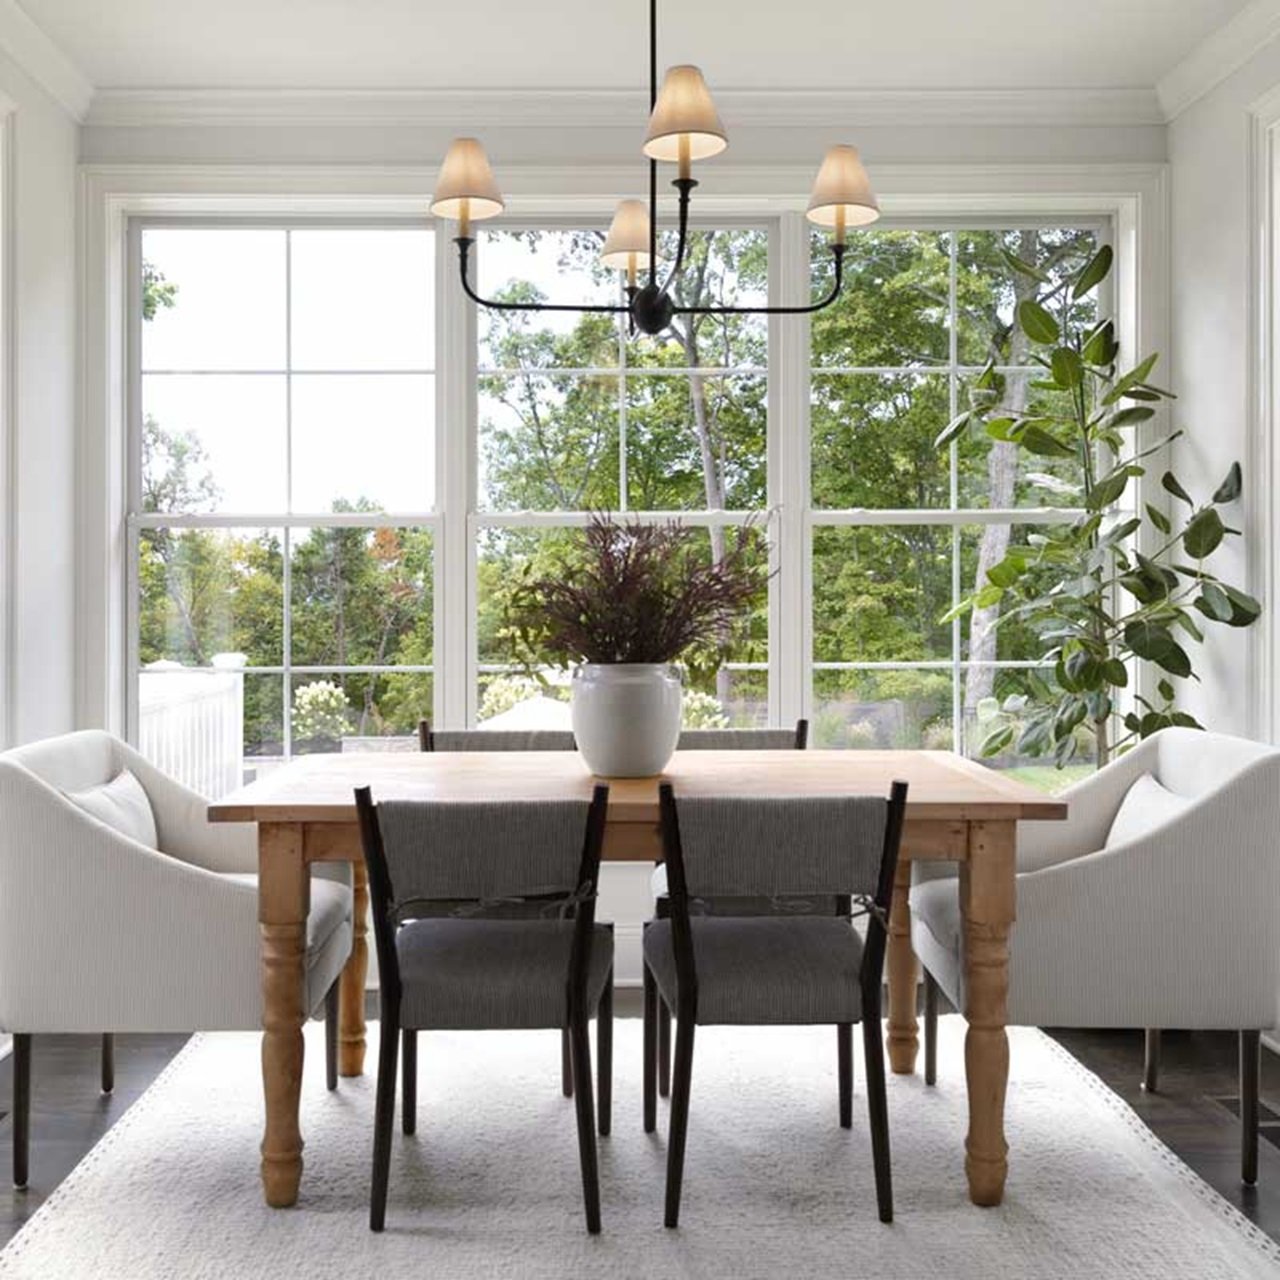 Dining room with wood table surrounded by double hung windows